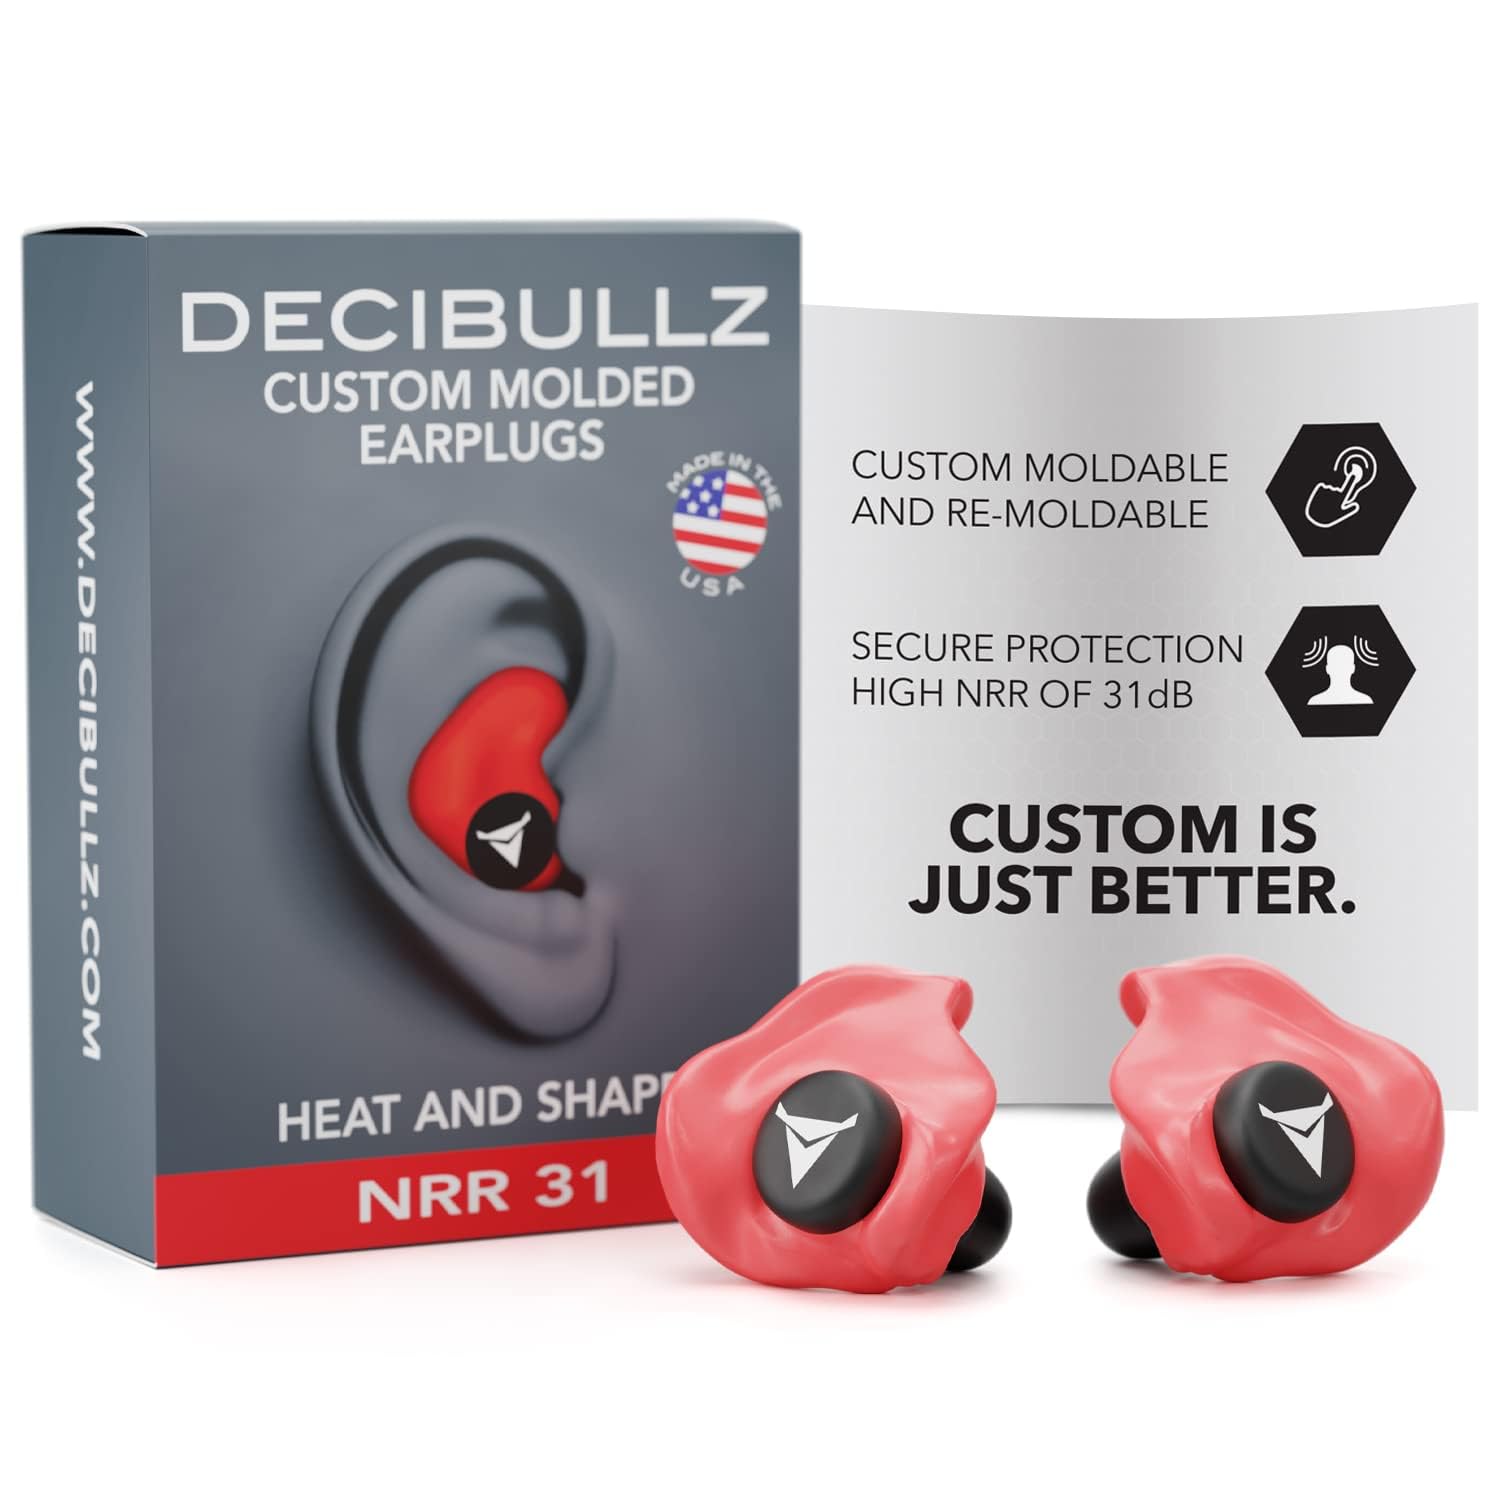 Decibullz - Custom Molded Earplugs, 31dB Highest NRR, Comfortable Hearing Protection for Shooting, Travel, Swimming, Work and Concerts (Red)